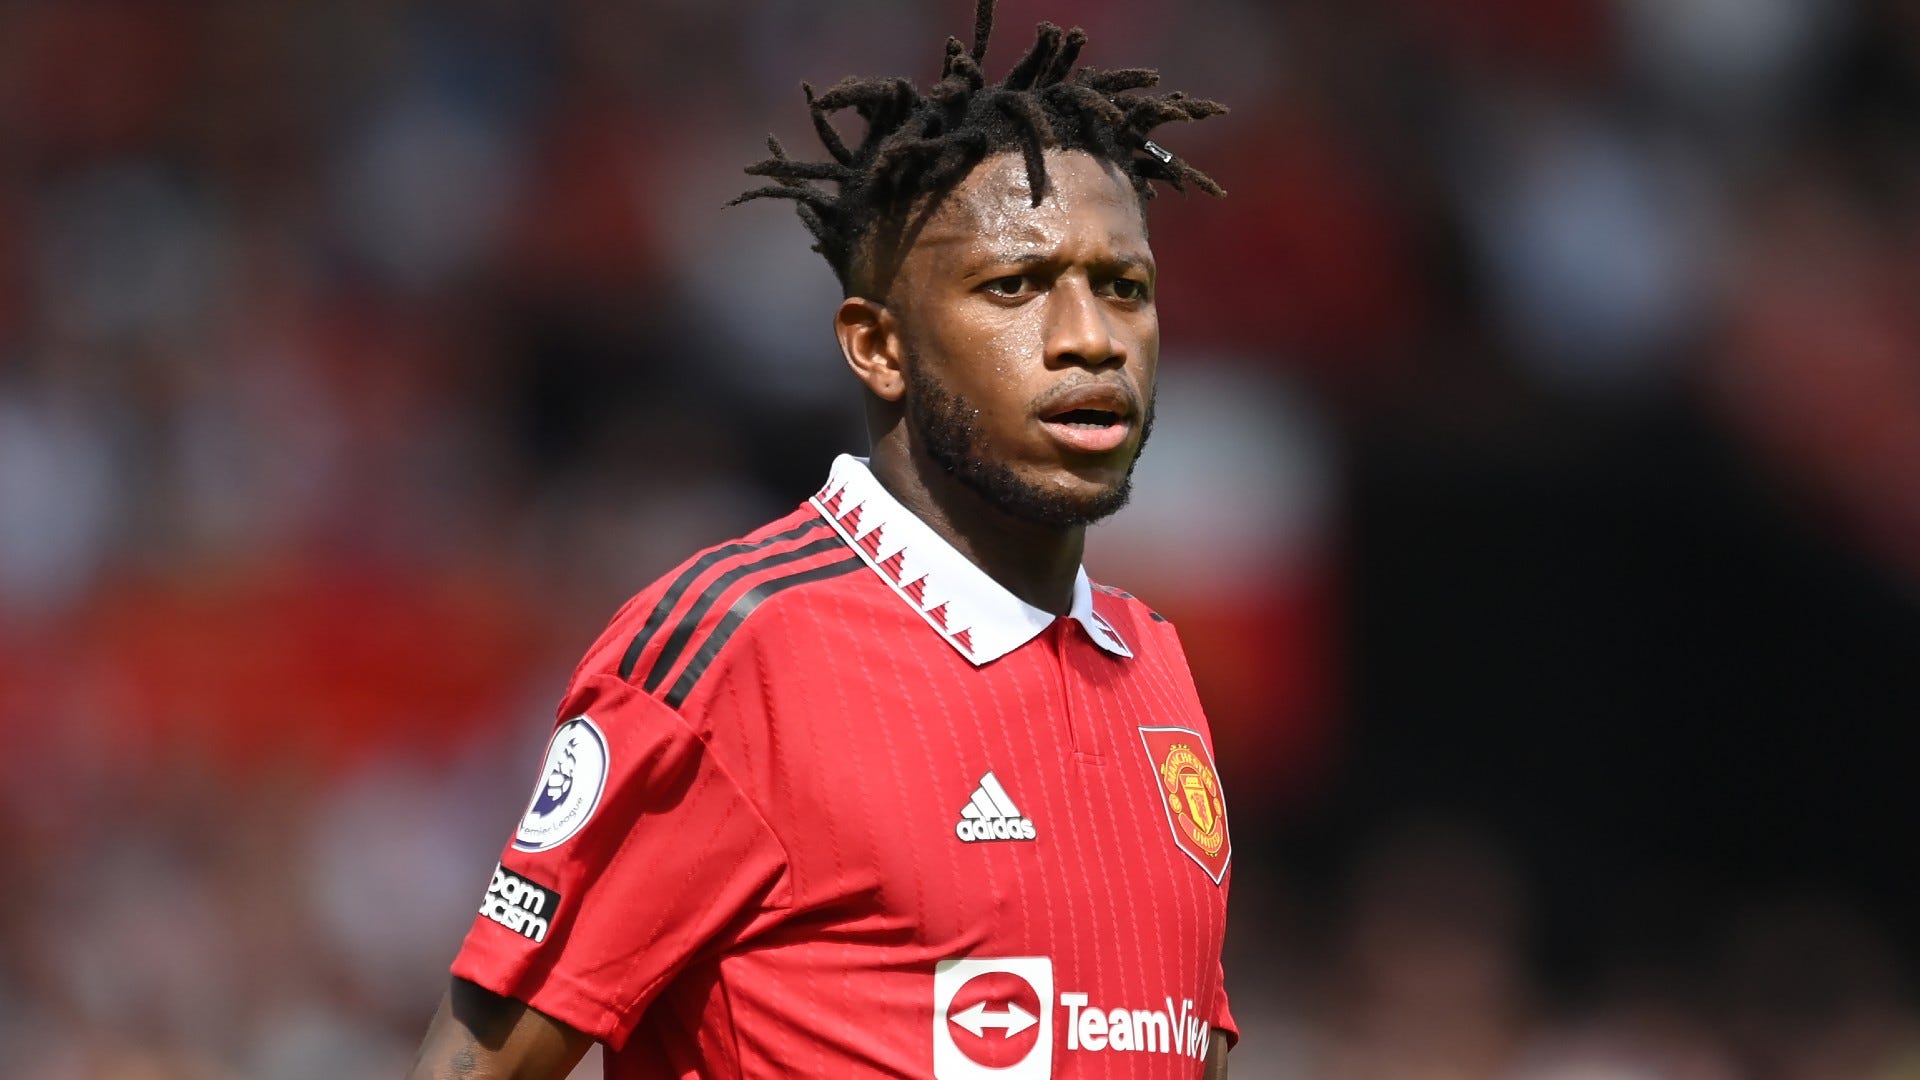 Fred has unfairly been made a scapegoat for Man Utd's failures, claims Fabinho | Goal.com